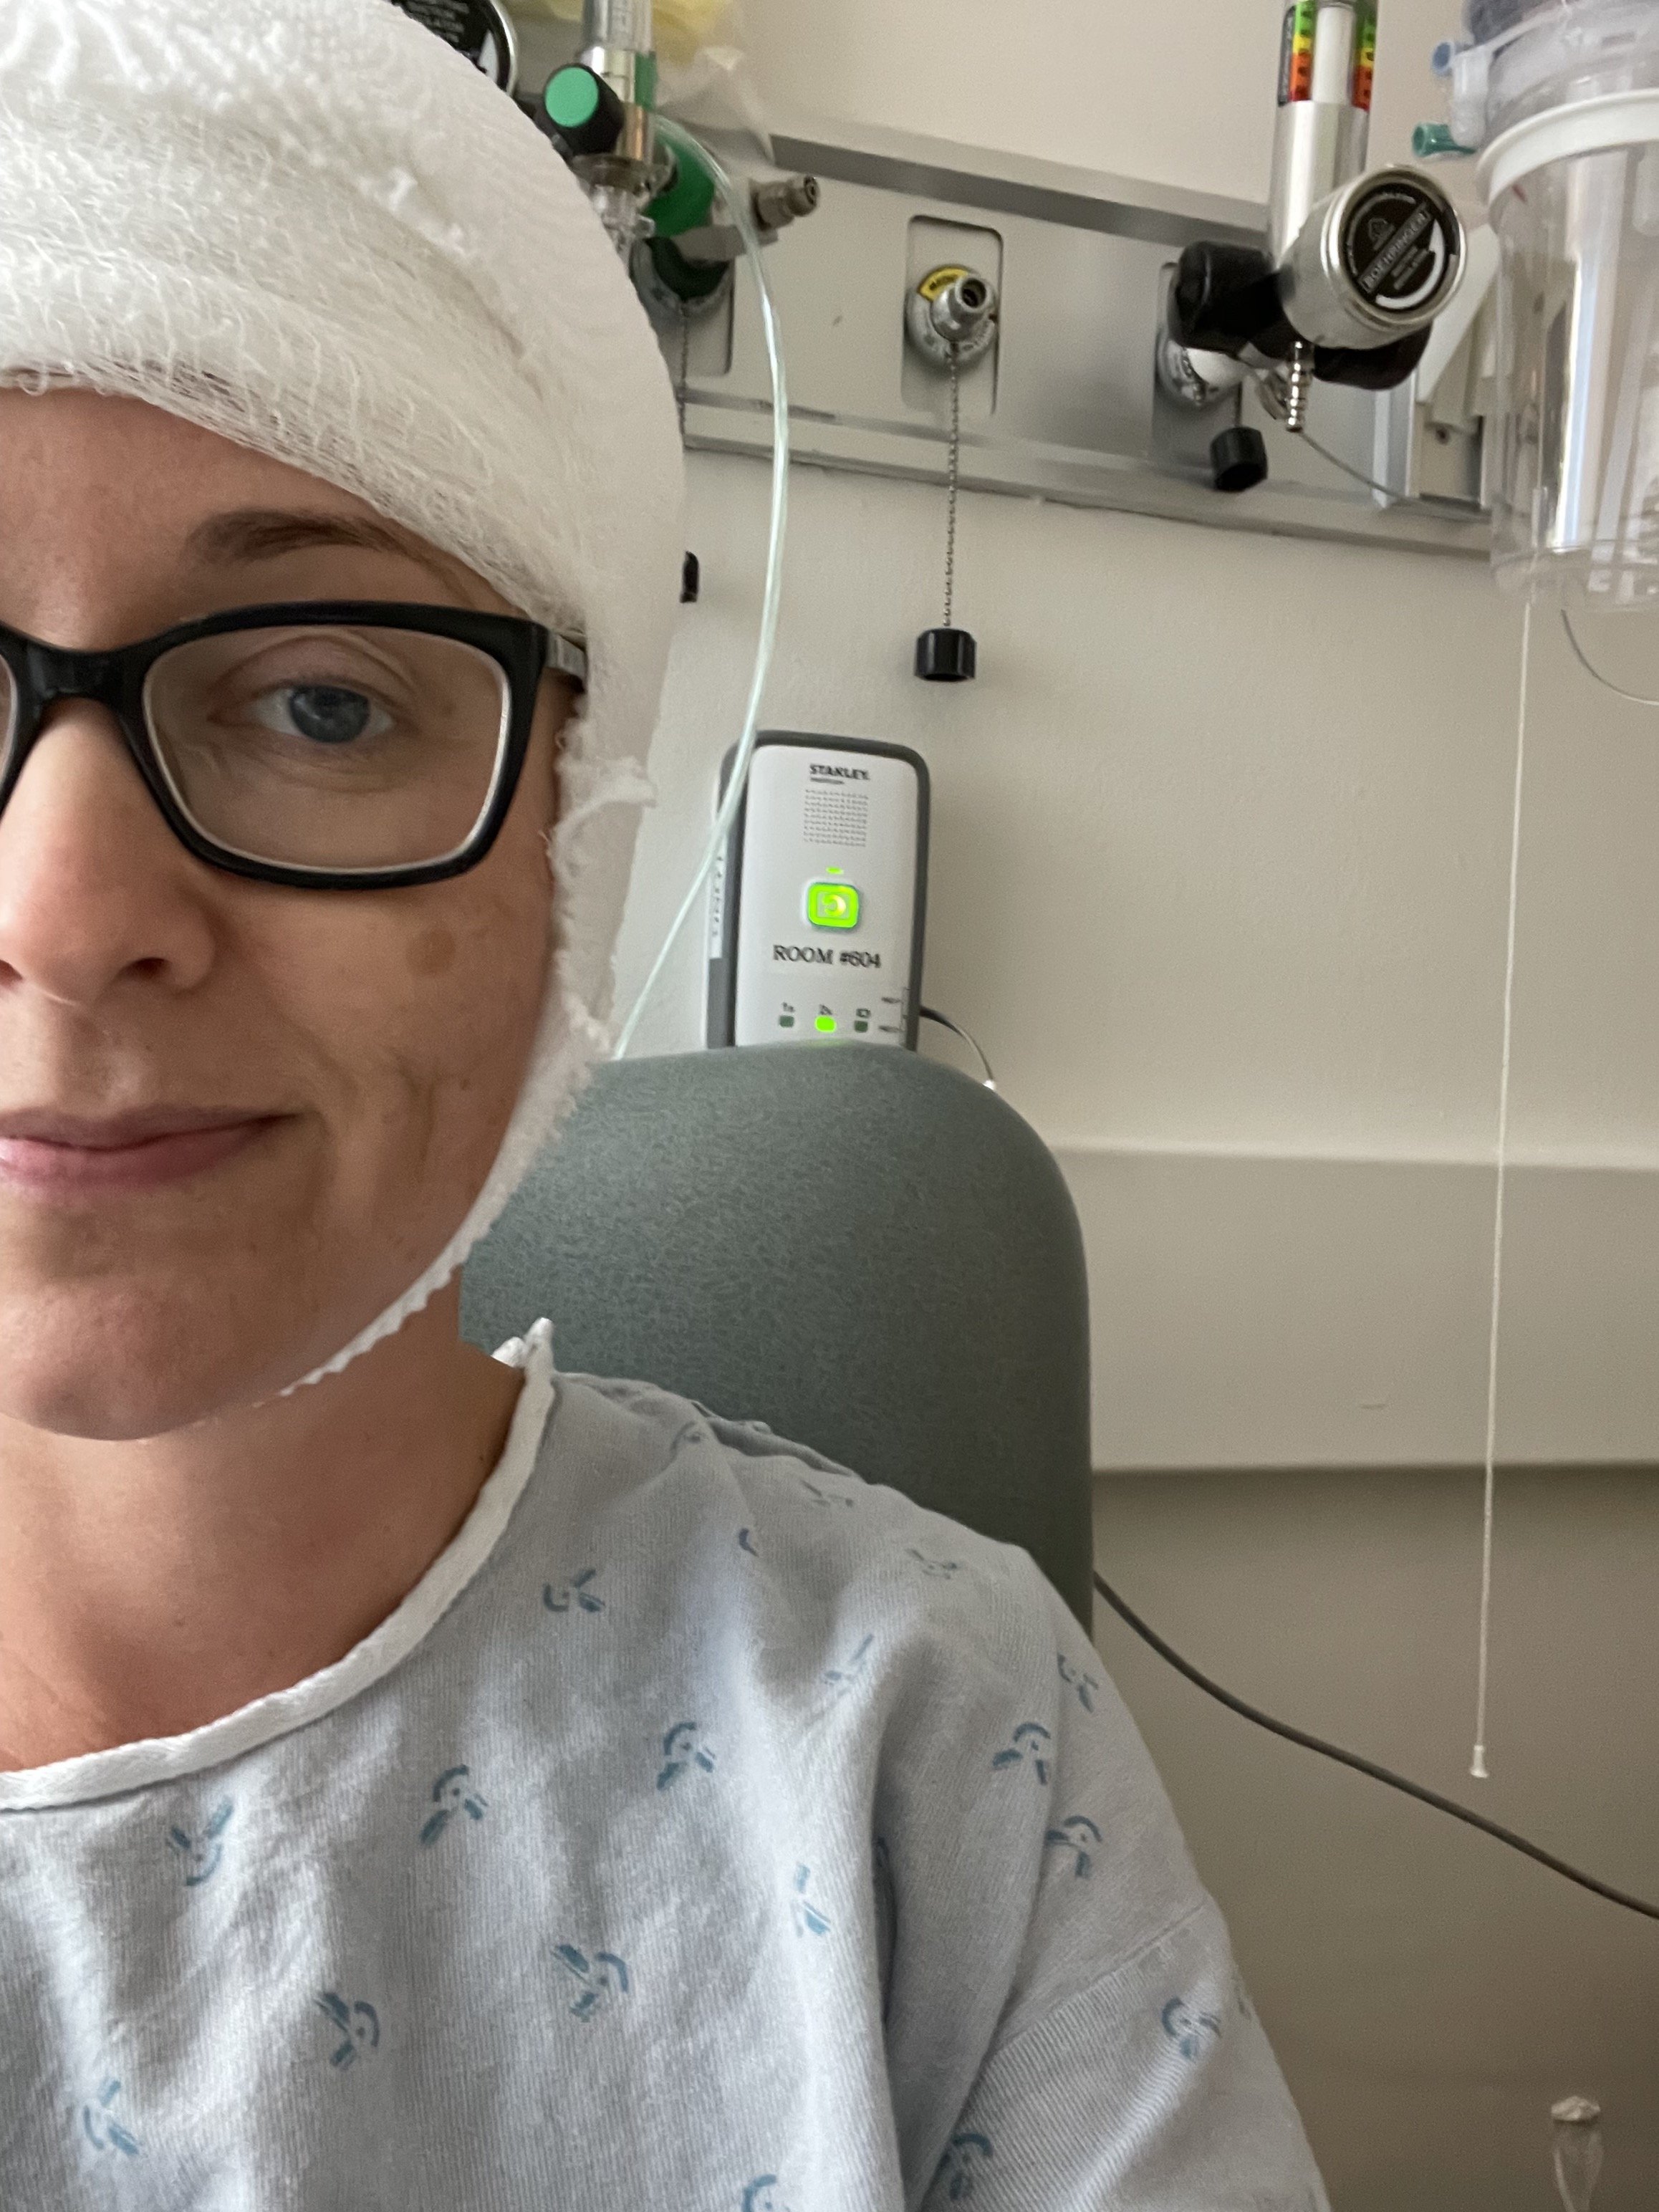 Together we're giant: forgetting about brain cancer for a day — The Liz  Army: Bringing punk rock to health care